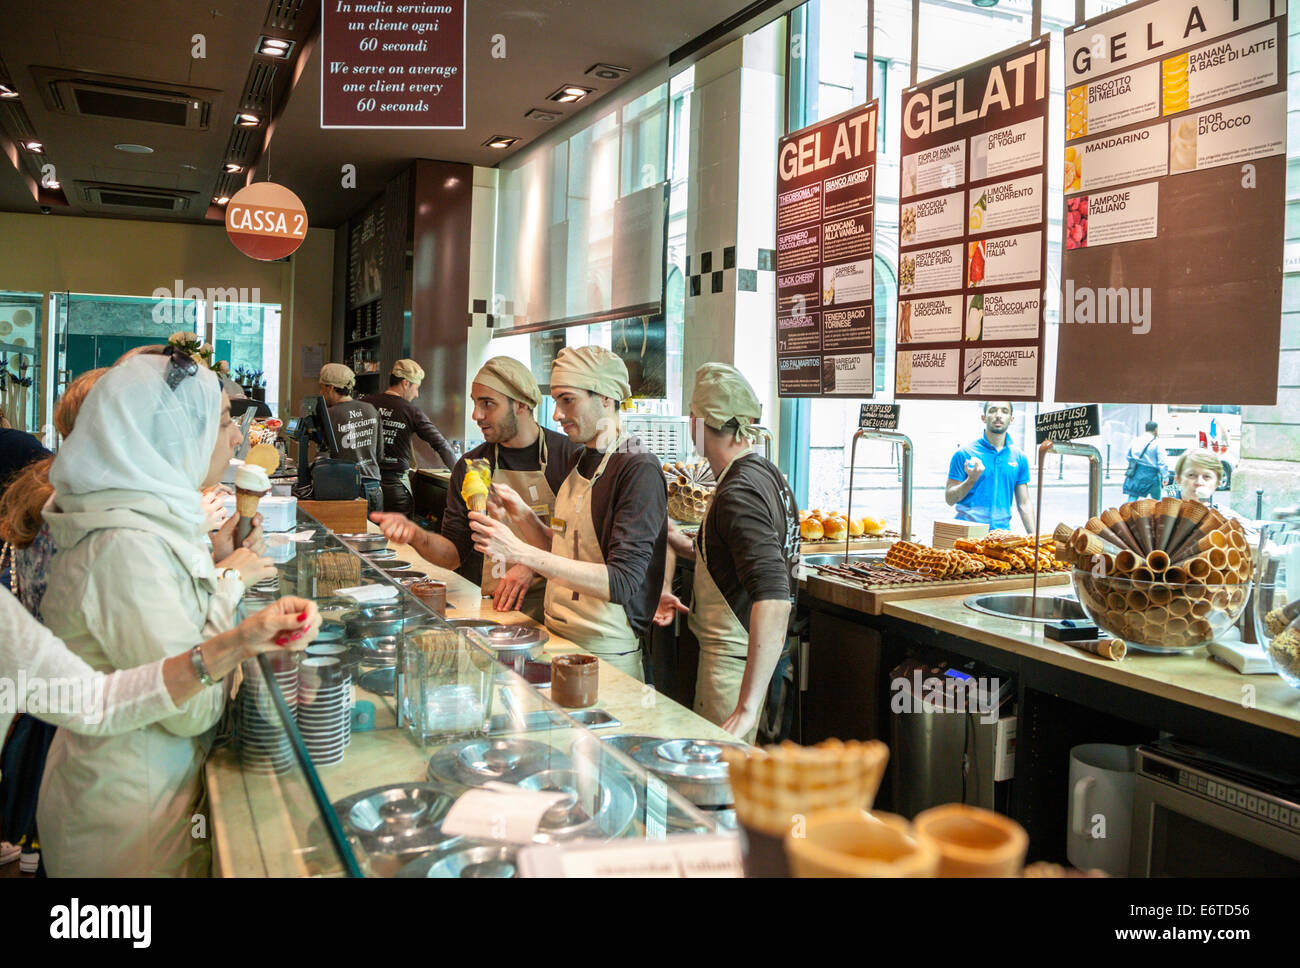 Gelato, Ice cream, shop with staff and customers in Milan, Italy Stock Photo